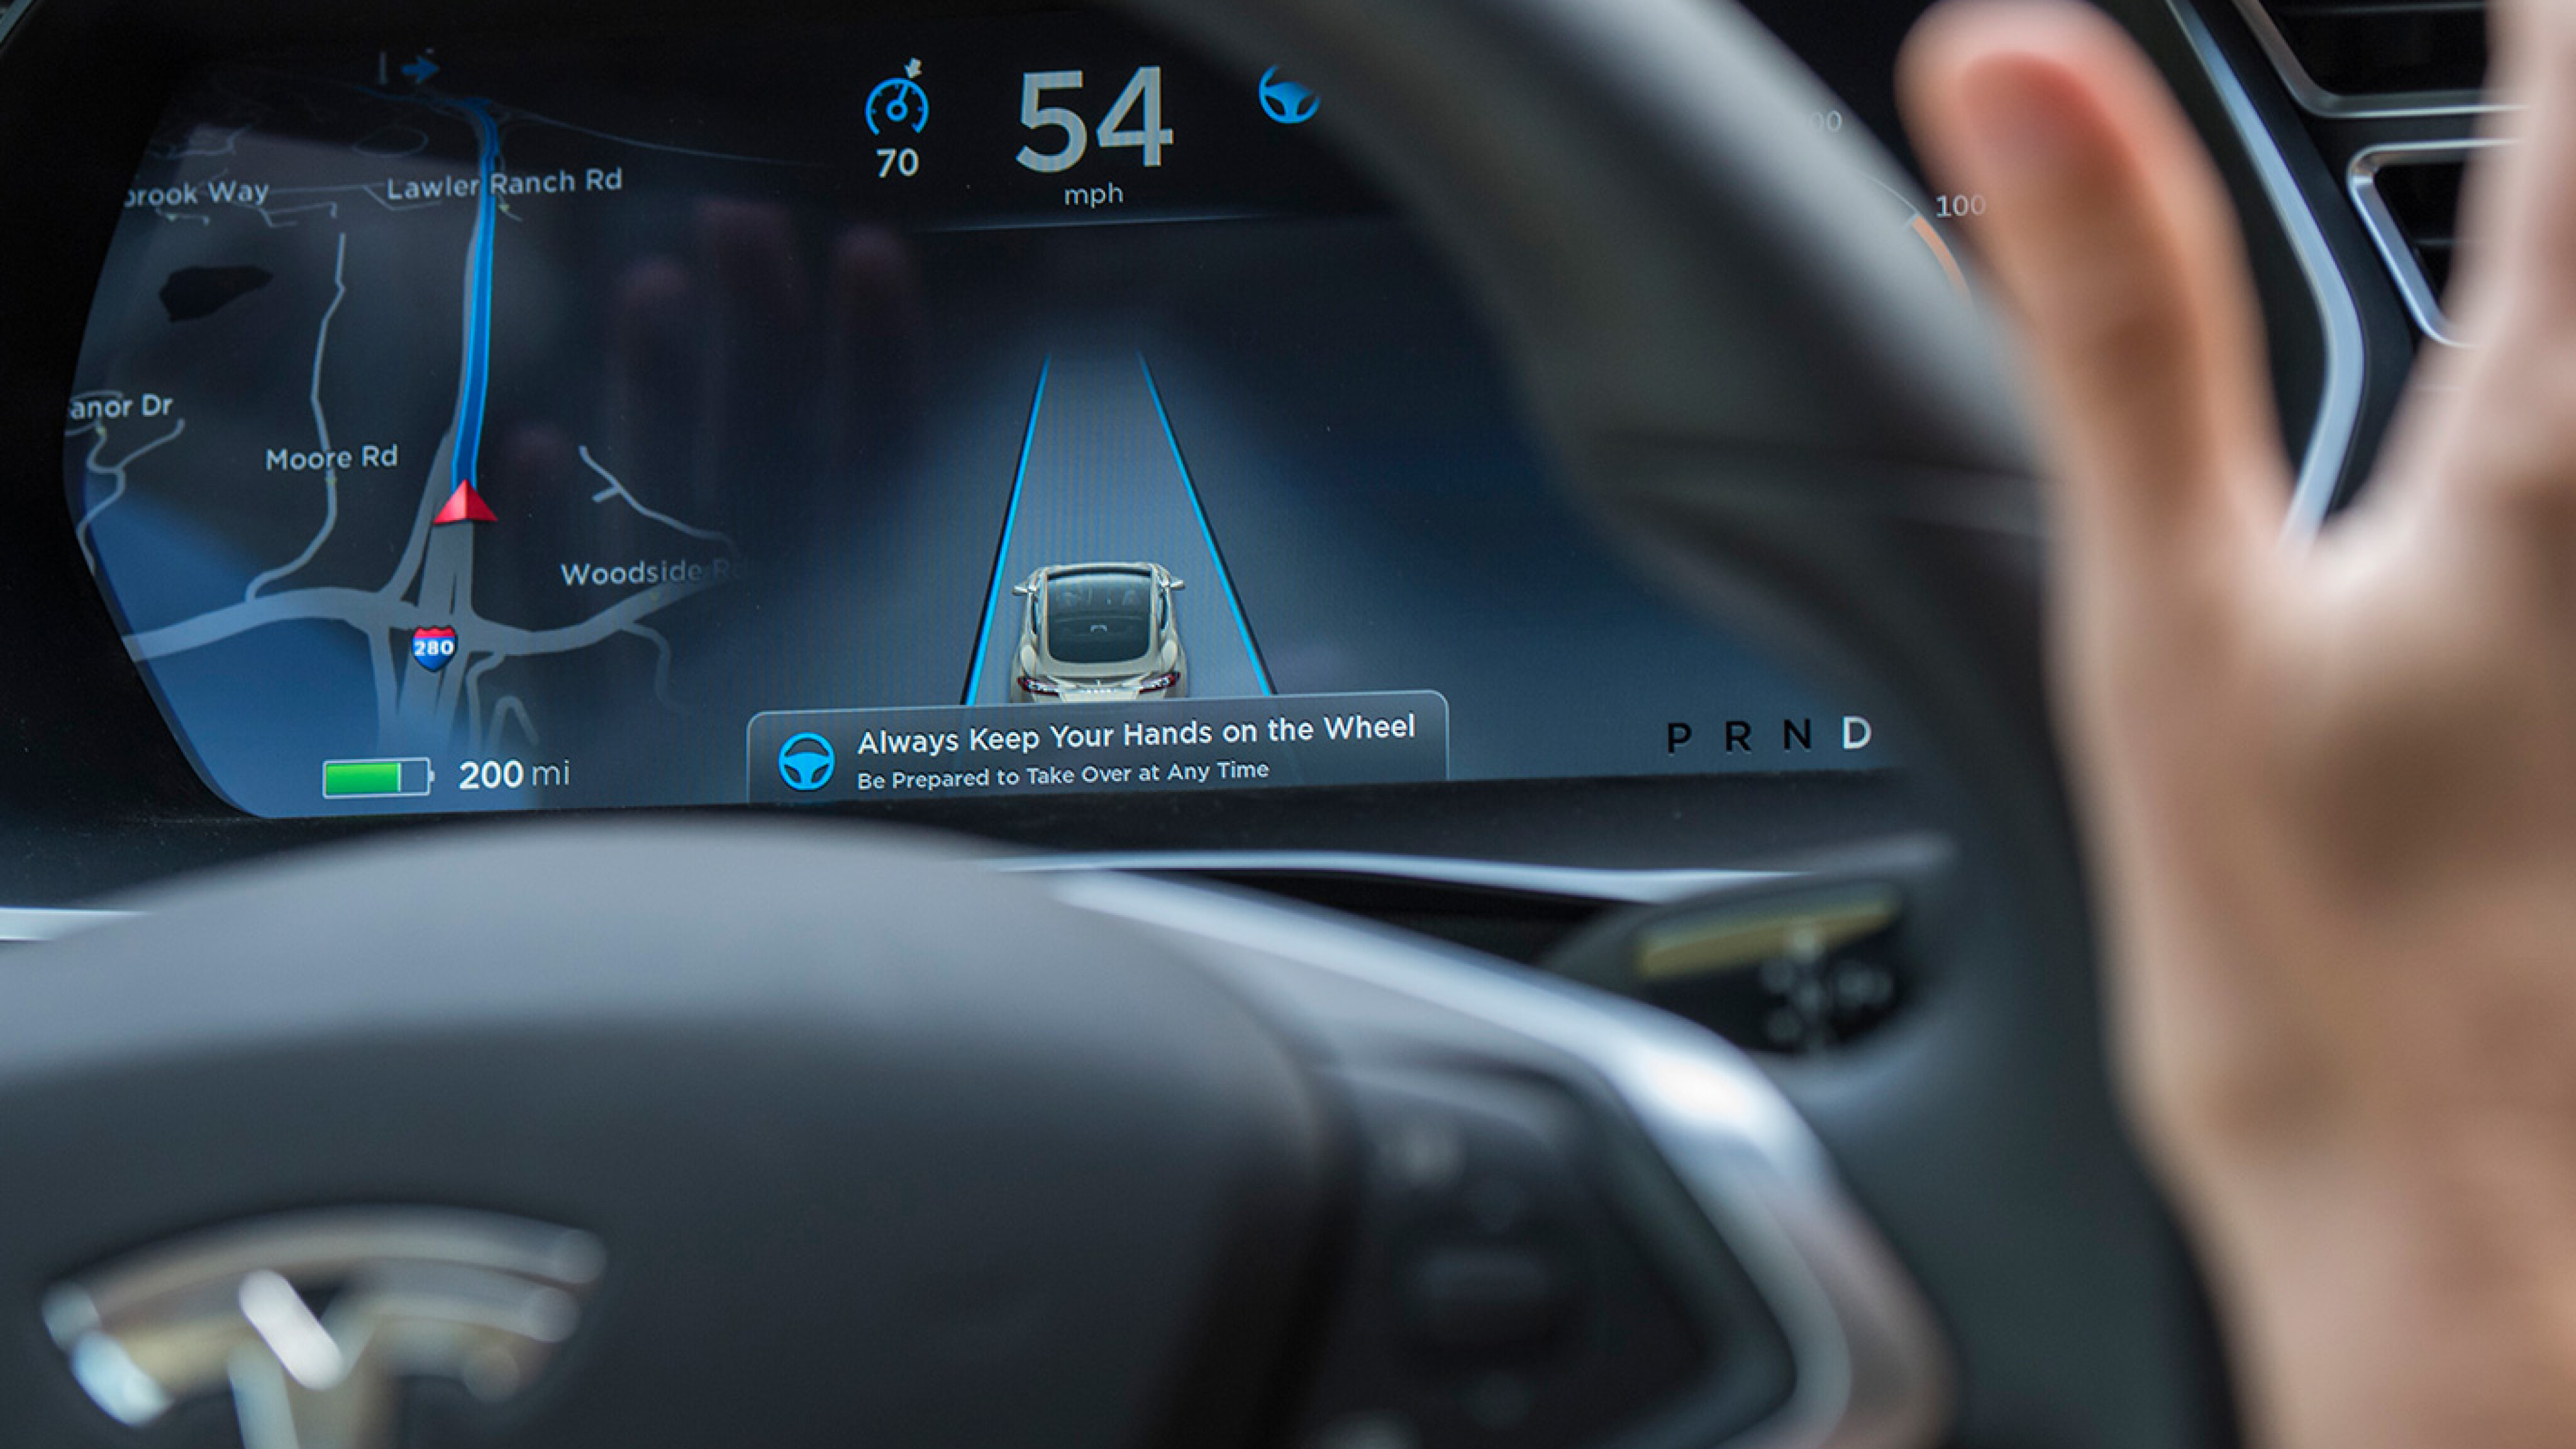 Tesla gifts Enhanced Autopilot trial for the holiday